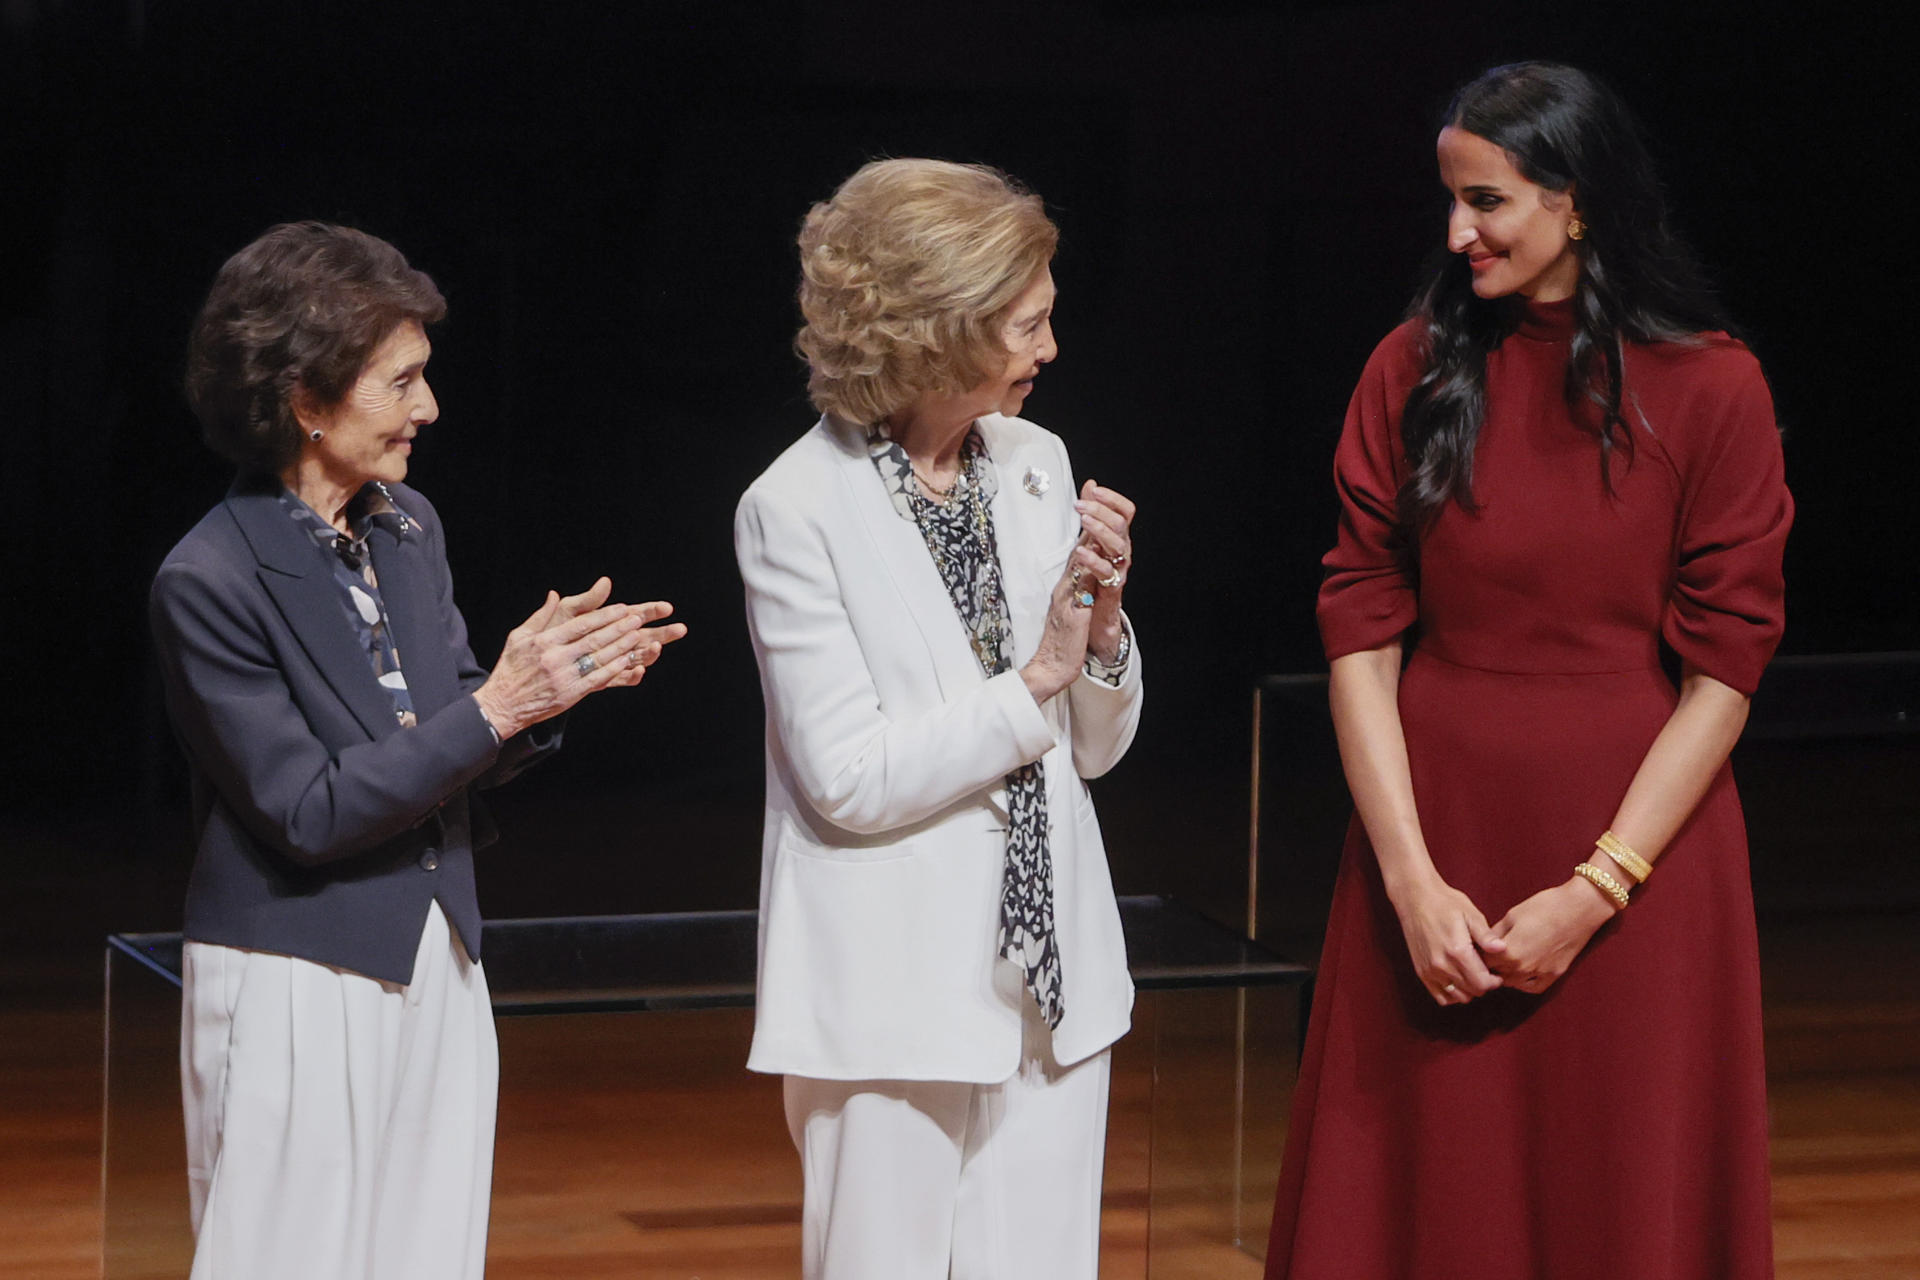 Spain's Queen Sofía (C), vice president and CEO of the Qatar Foundation, Sheikha Hind bint Hamad Al Thani (R) and Paloma O’Shea, Founding President of the Reina Sofía School of Music (L), during the closing ceremony and concert of the 2022-2023 academic year of the Reina Sofía School of Music at the Museo Nacional Centro de Arte Reina Sofía in Madrid, Spain, 20 June 2023. EFE/
